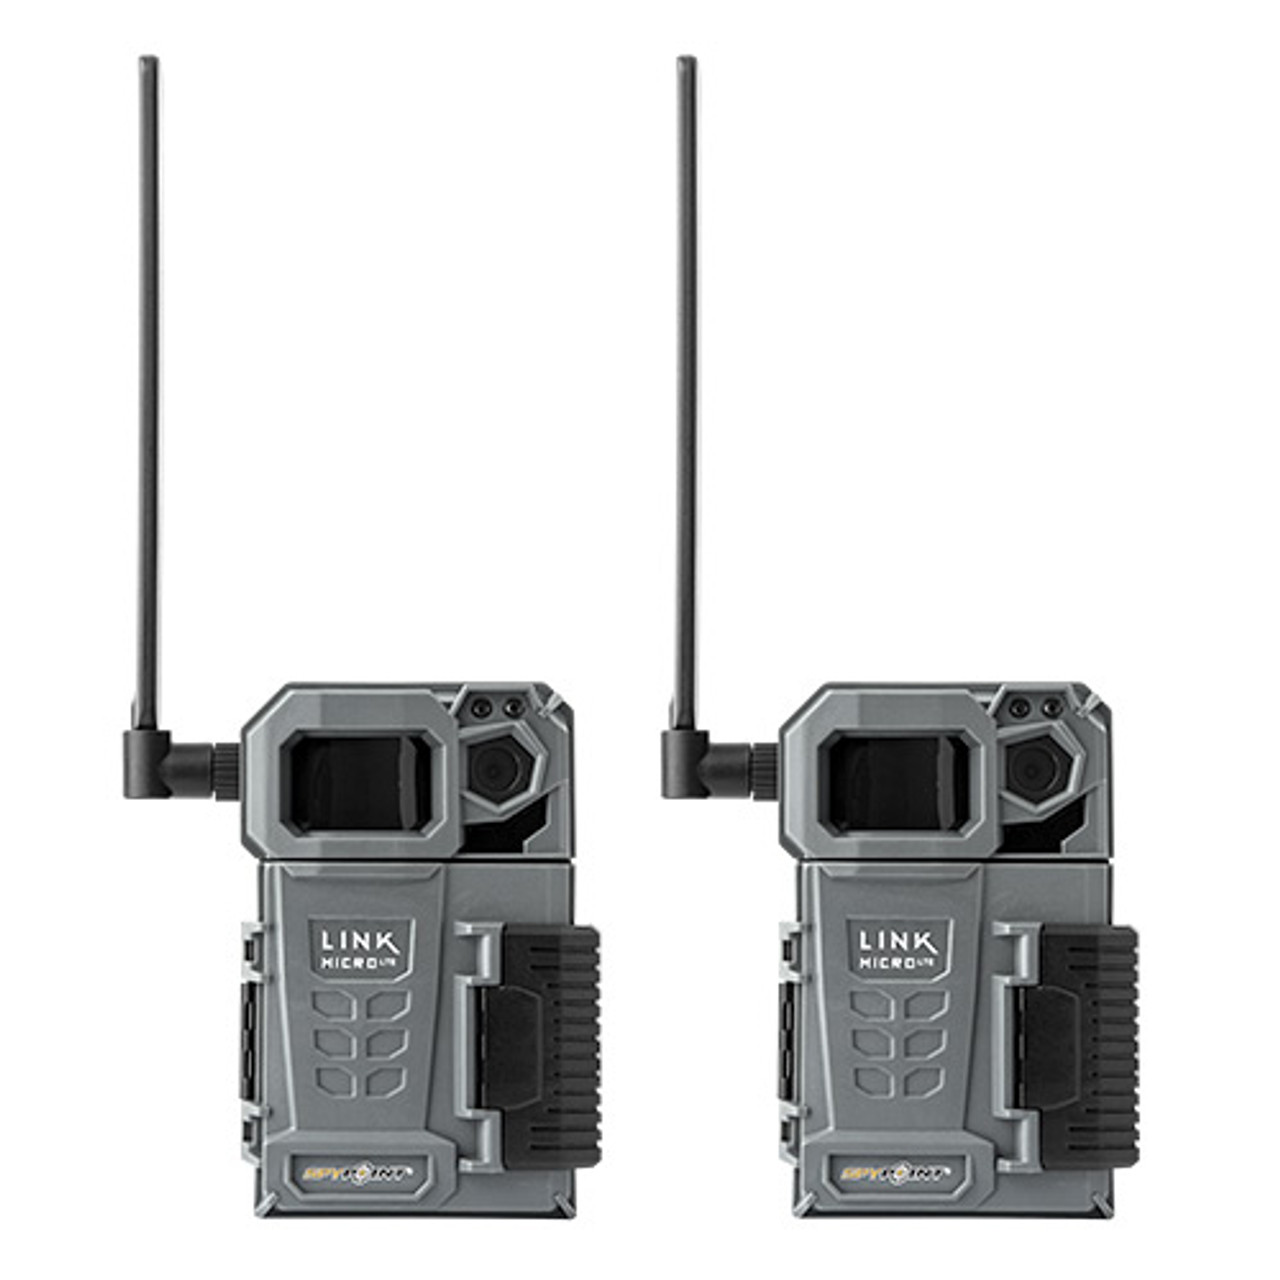 Link-Micro-LTE Twin Pack Cellular Trail Cameras by SpyPoint